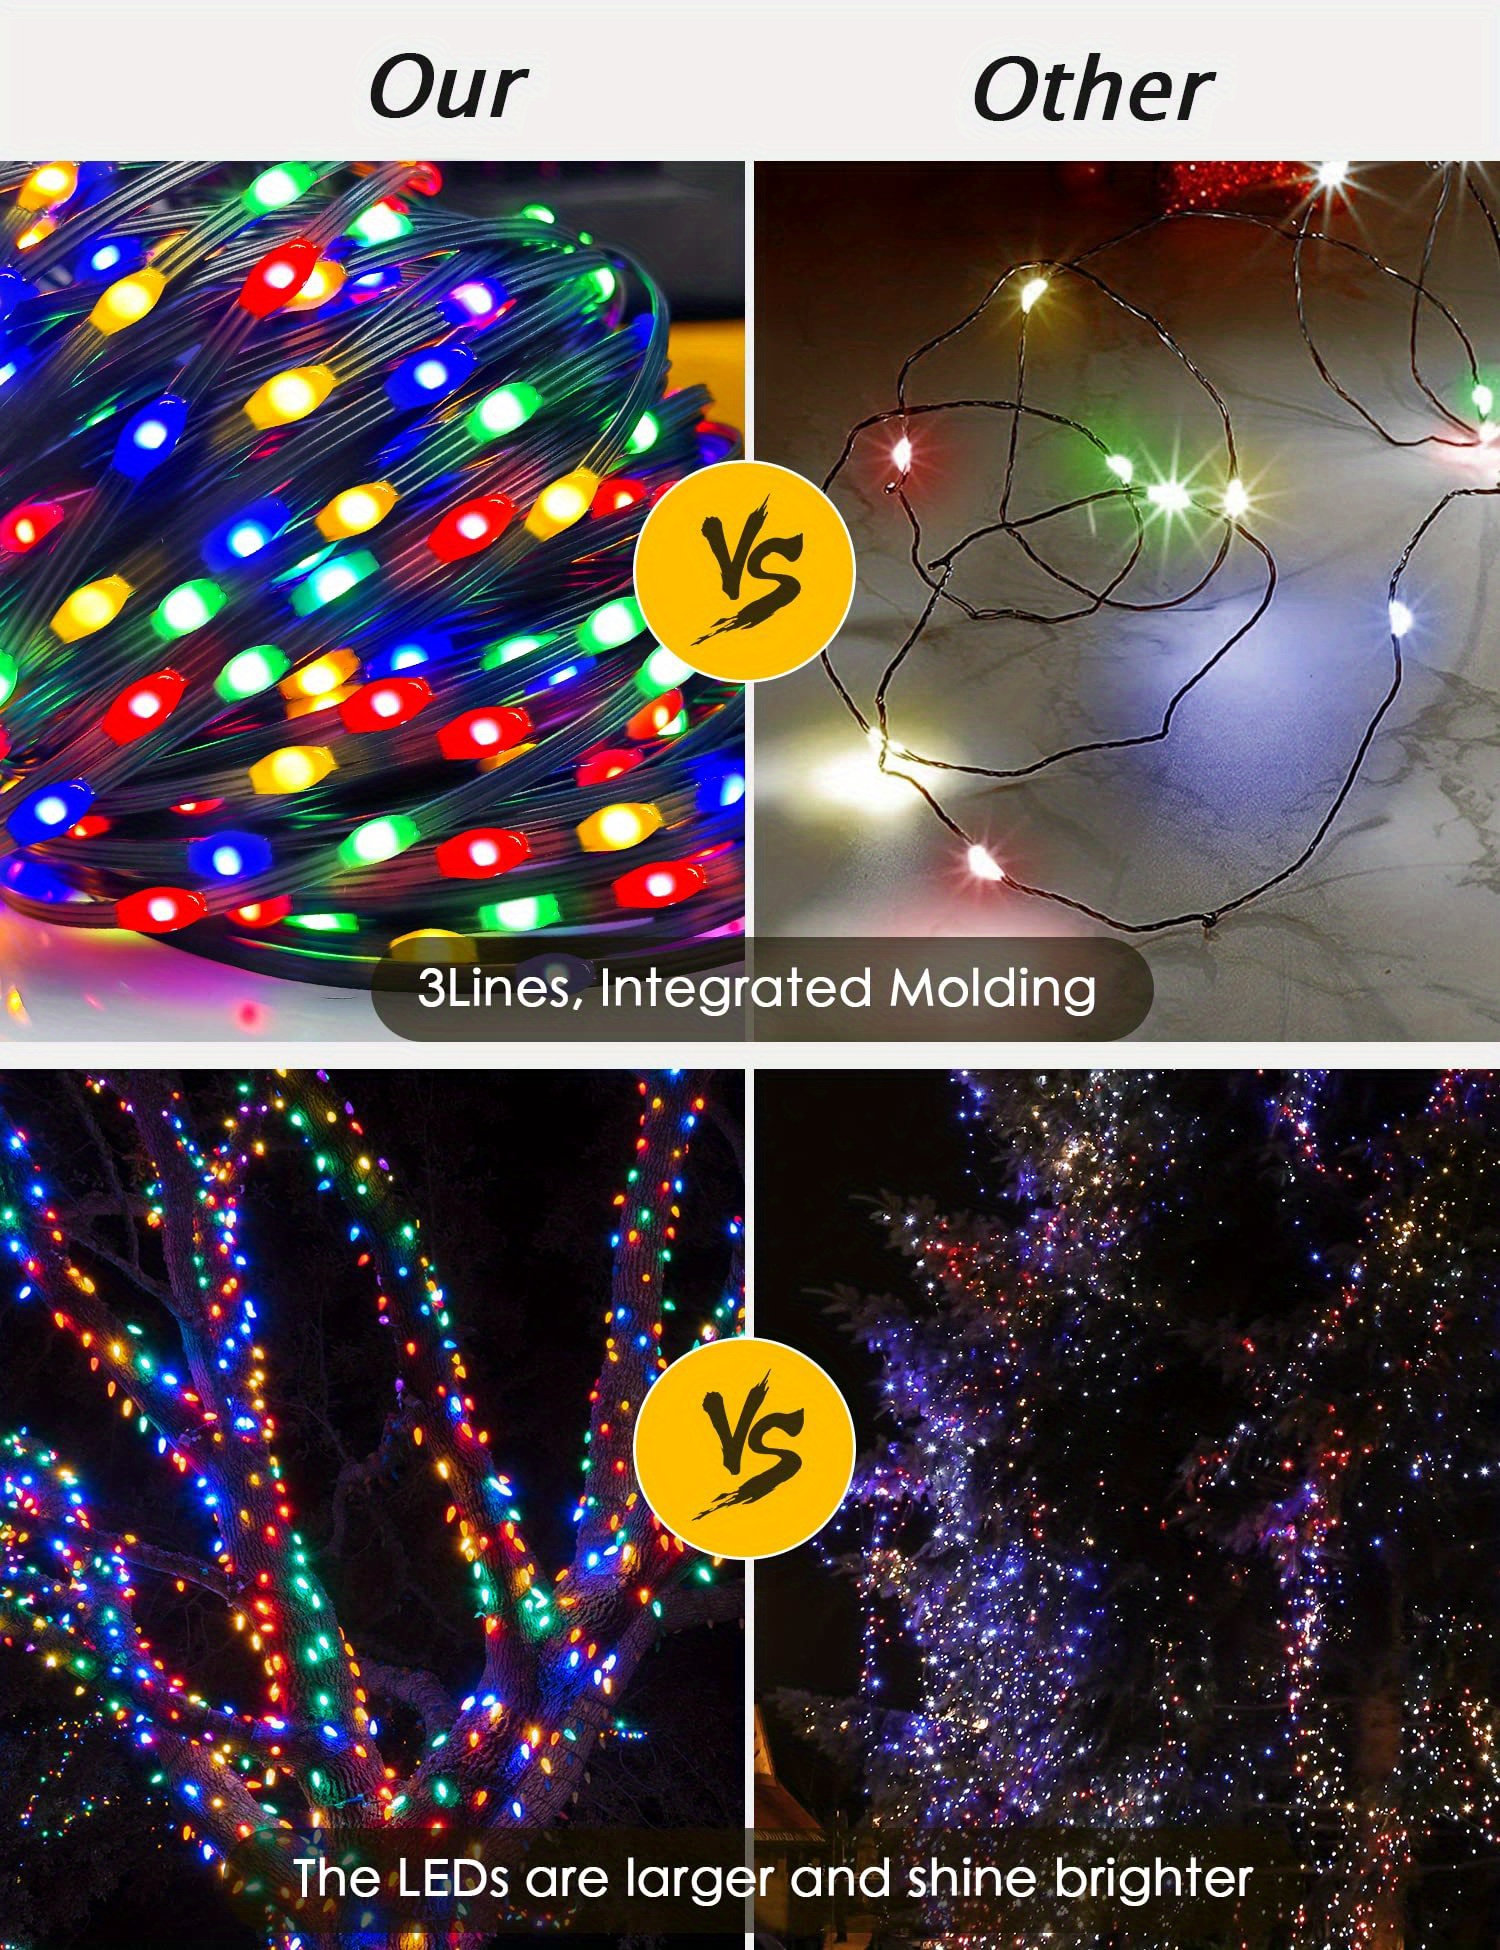 1 set 1000 led christmas lights 405ft outdoor string lights plug in fairy lights green wire with remote timer 8 lighting modes decorations lights for tree xmas indoor wedding garden multi colored warm white cool white details 9